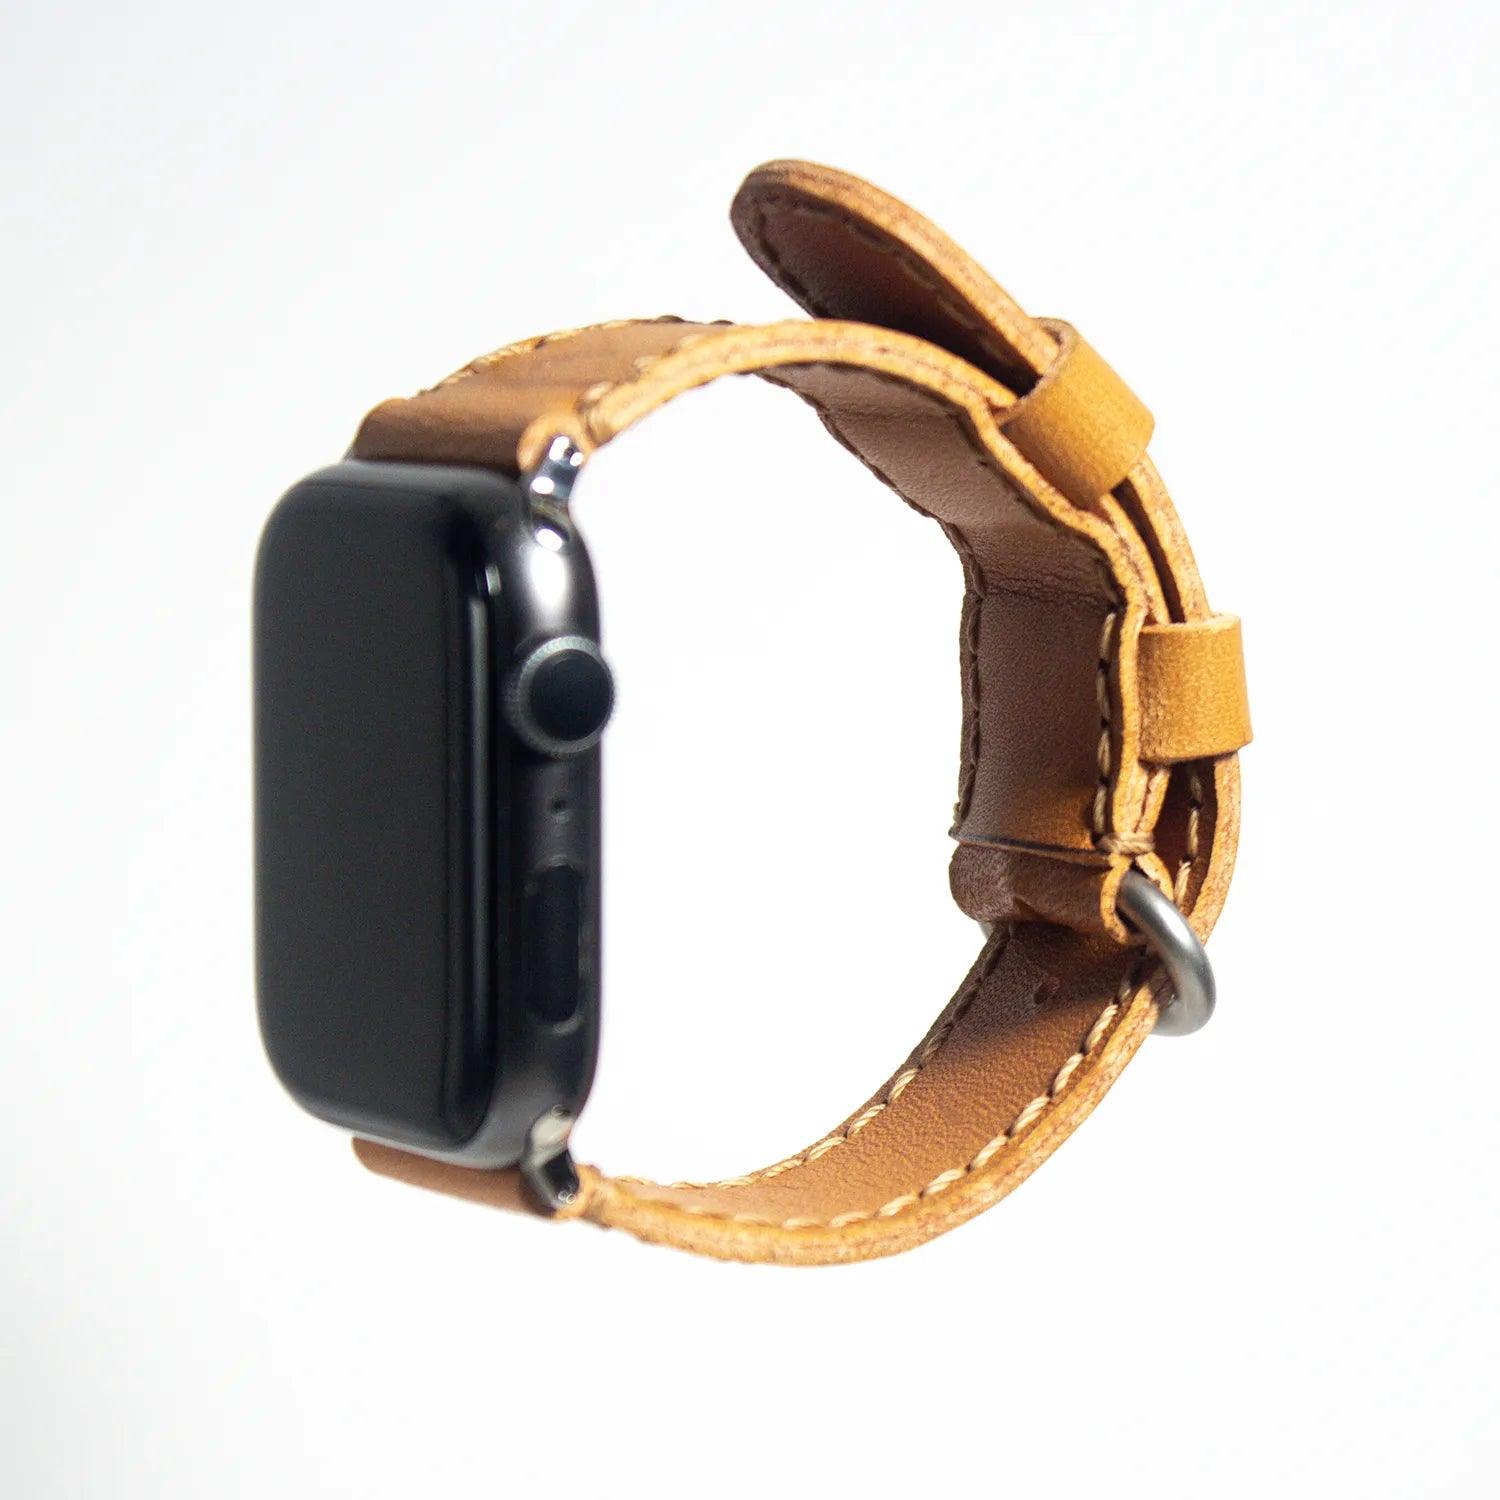 Elegant apple watch leather band crafted from light orange Buttero leather, designed for a chic and modern look.